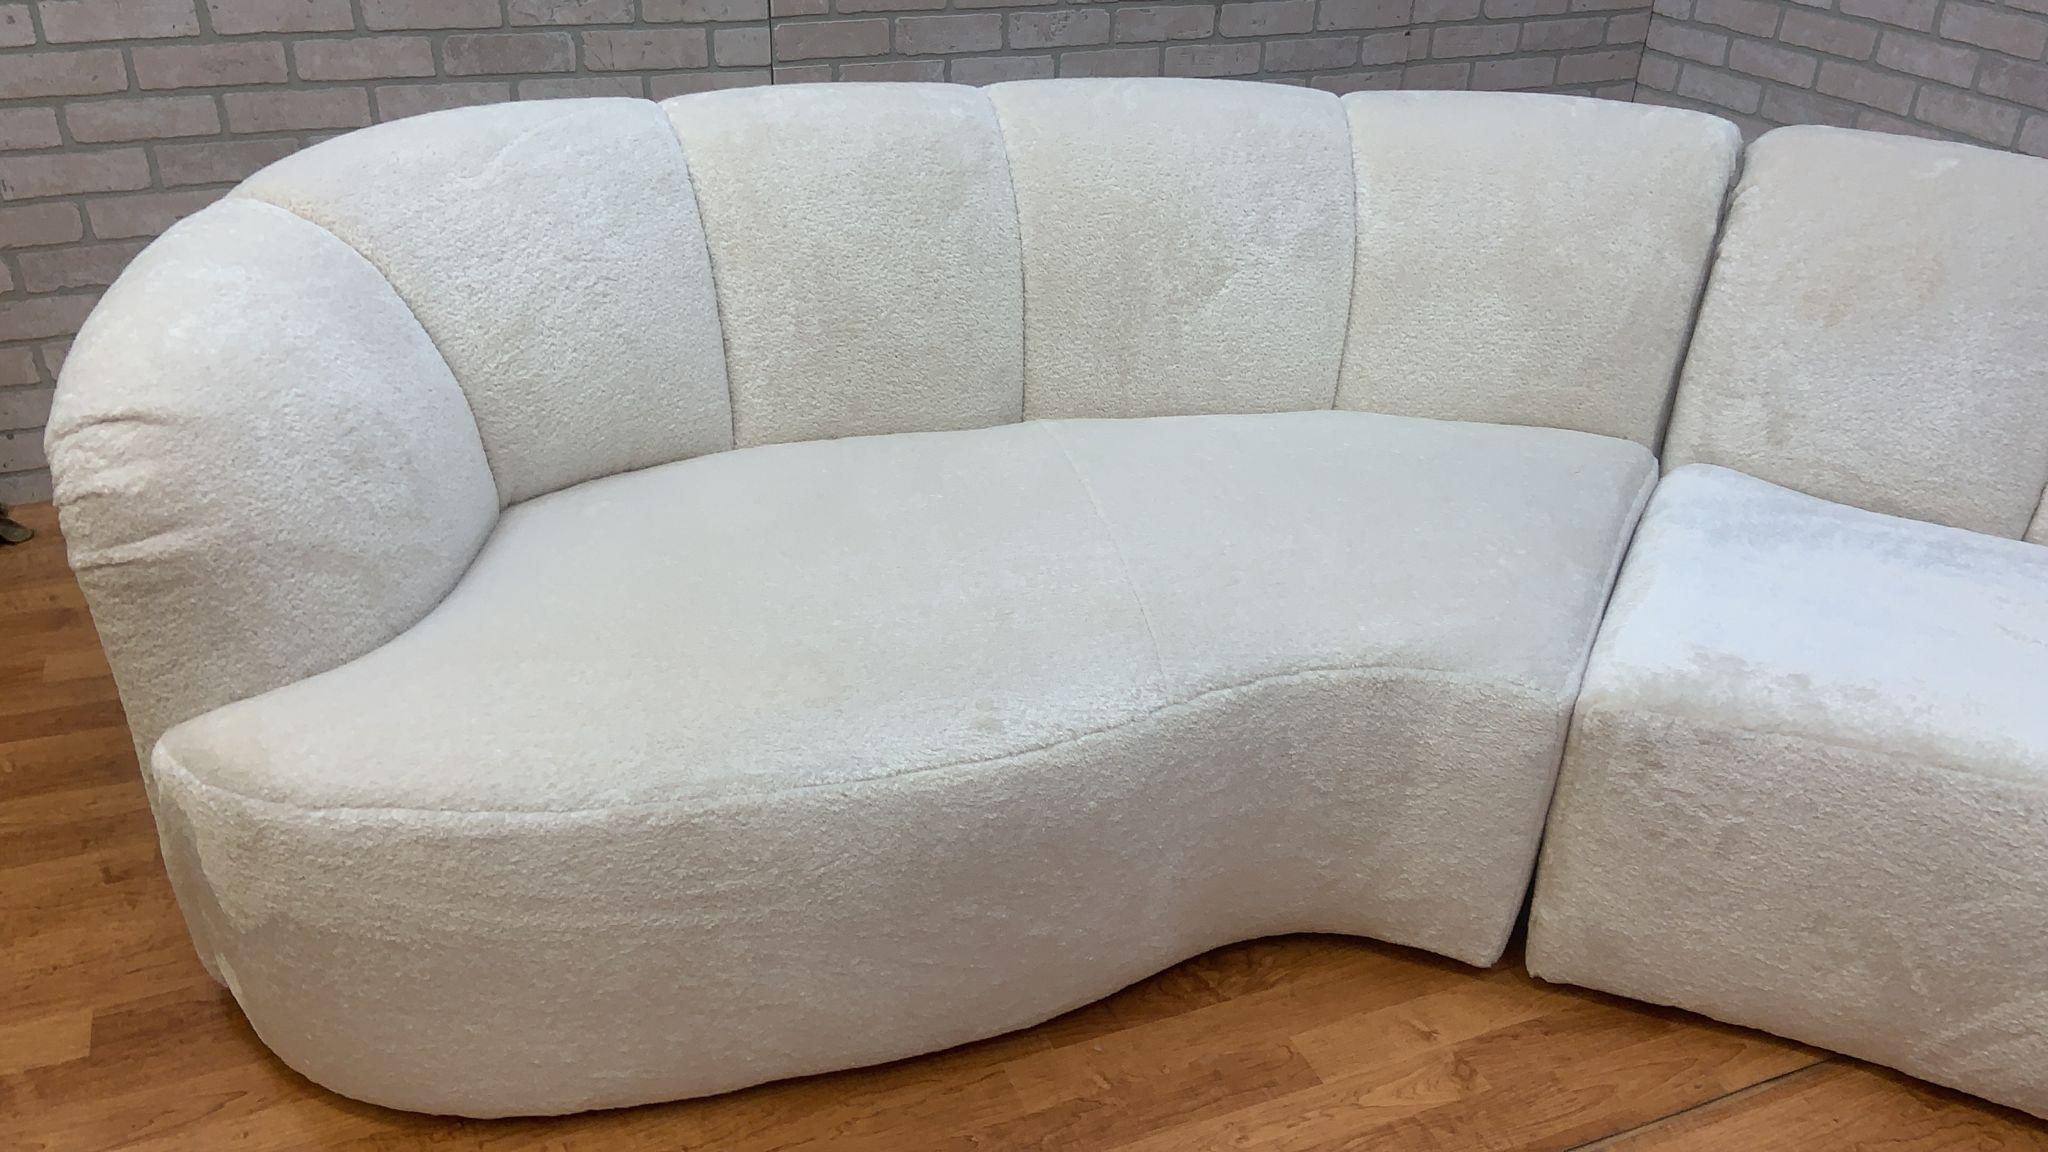 Curved Channel Back Serpentine Sectional Sofa Newly Upholstered in Alpaca Wool 2